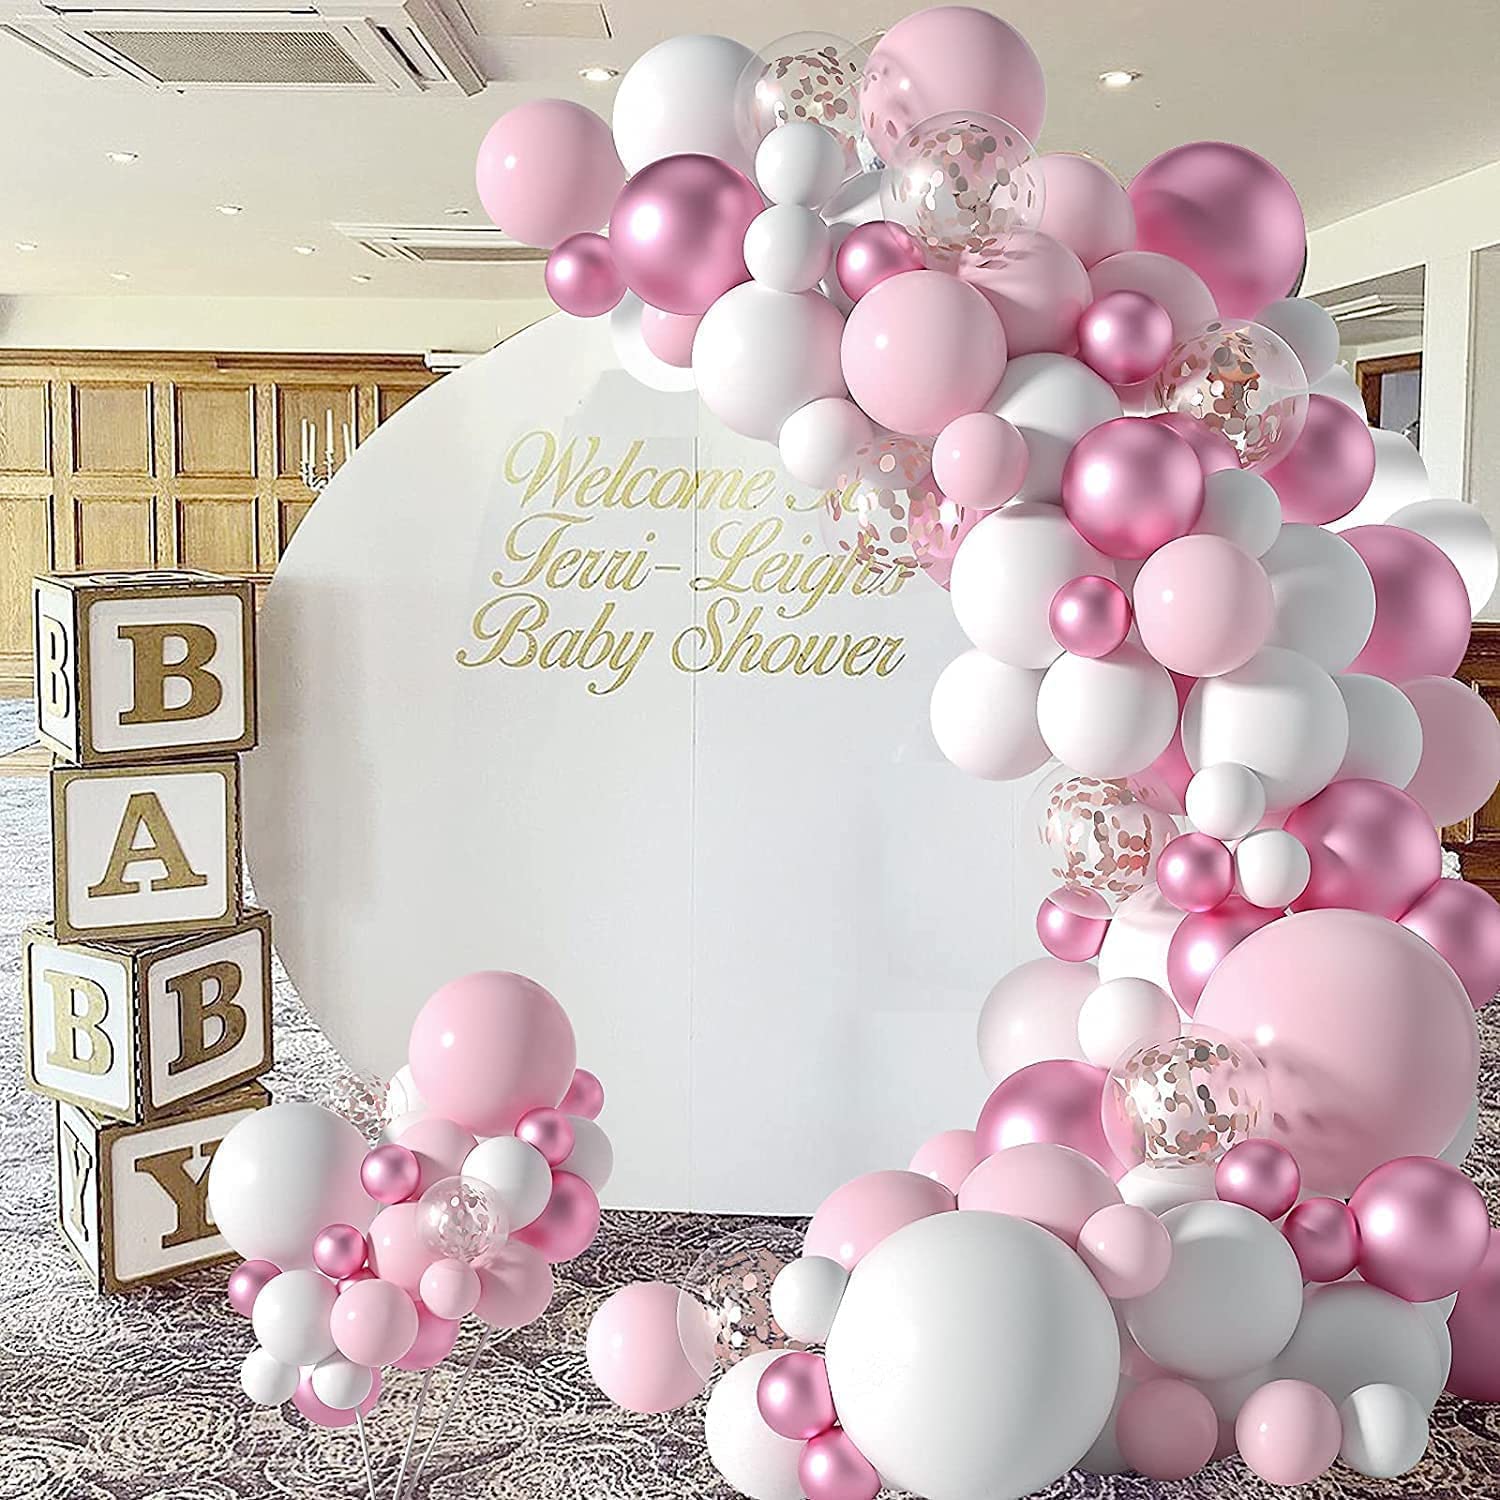 Light Pink Balloons Garland Arch Kit - White and Rose Gold Balloons Set for boho baby shower decorations,Valentine Wedding, Birthday, Graduation, Anniversary Party